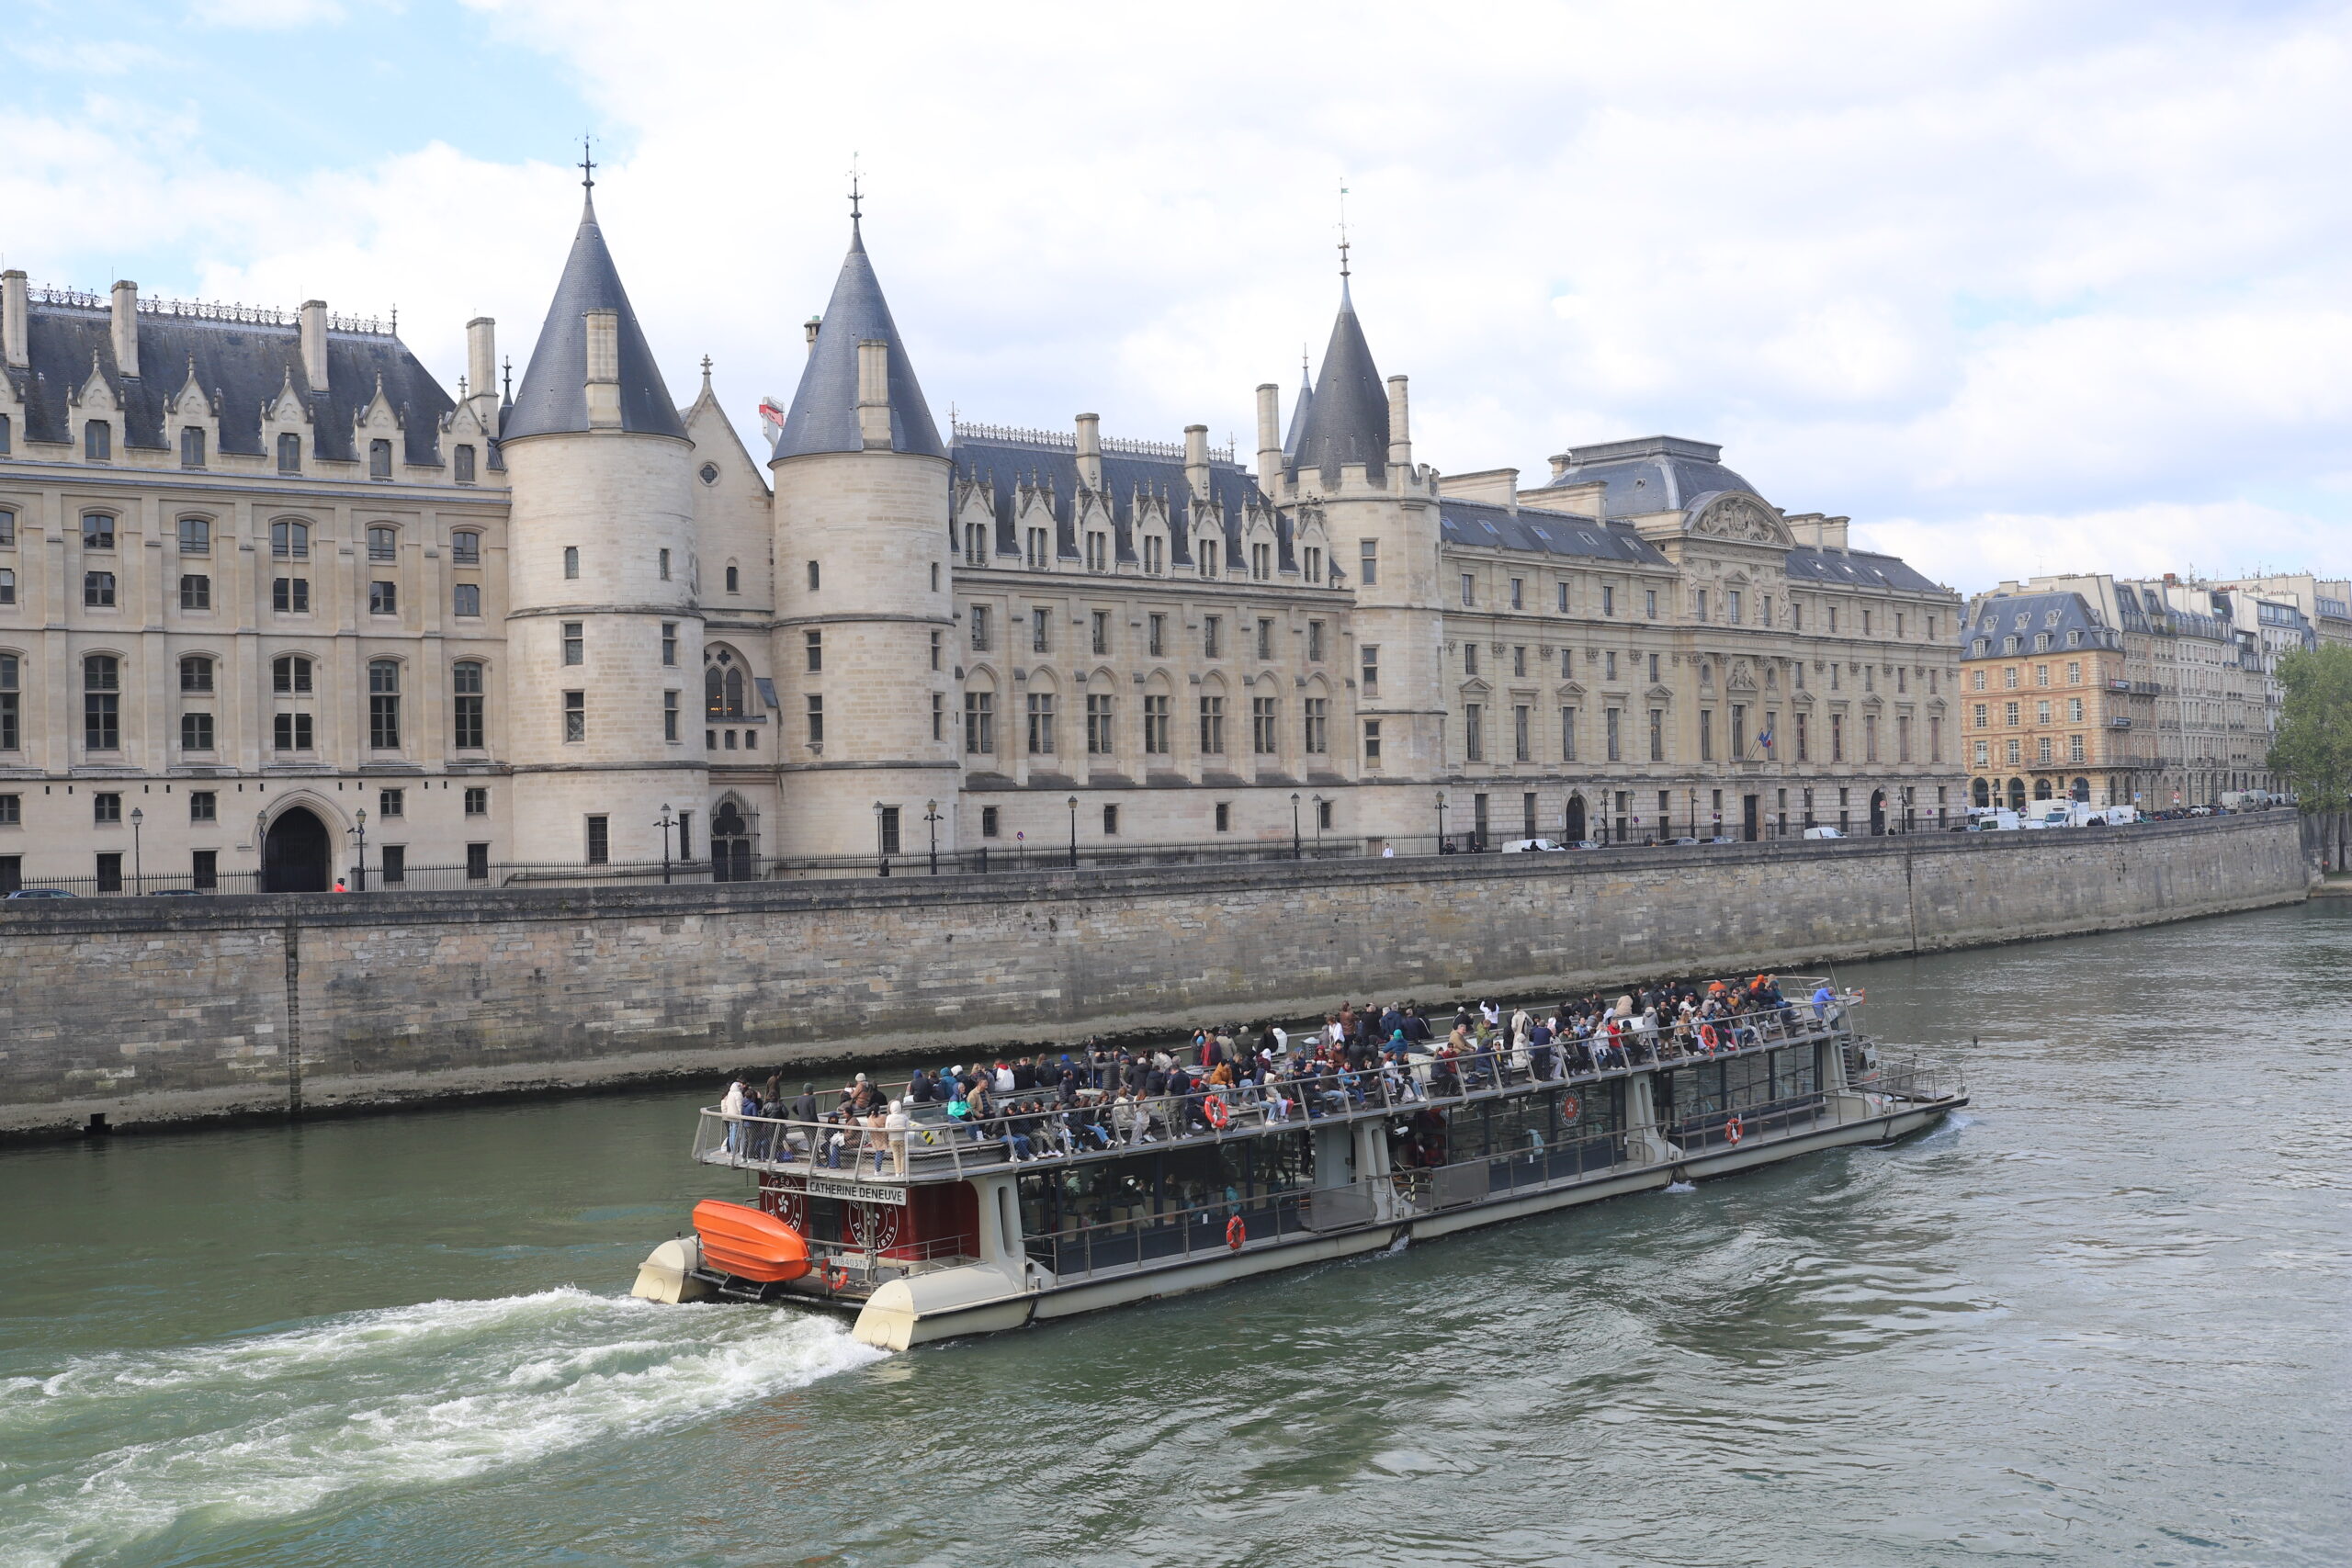 The Charm of Strolling Along the Seine Versus the Overcrowded Riverboat Experience